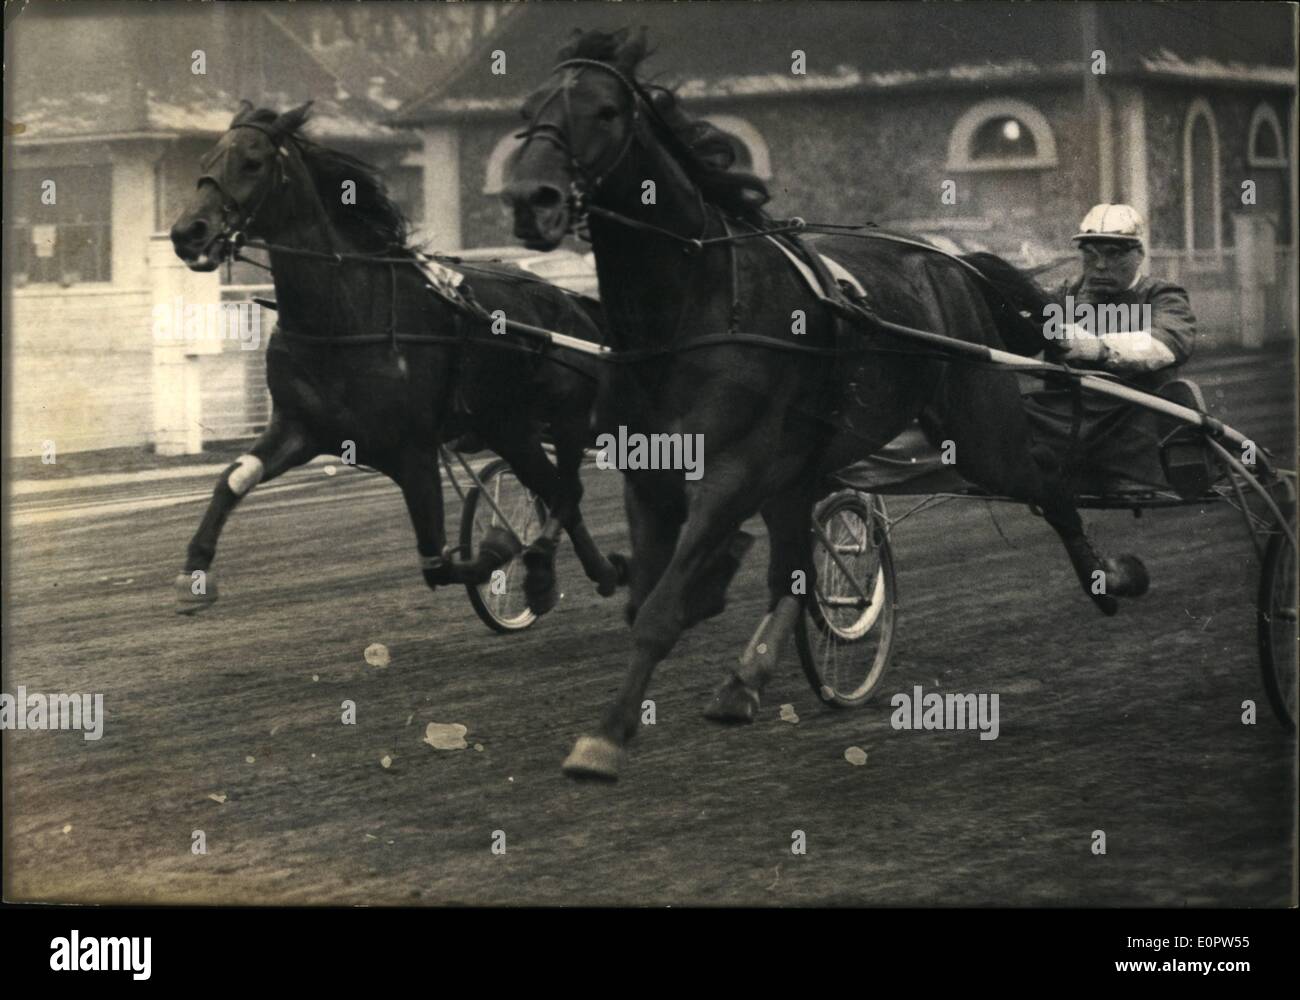 Jan. 01, 1957 - Biggest Trotting Event of The Season; Prix D'Amerique At Vincennes OPS: Swedish horses Tampiko and Smaragd participating in the race seen at training at the Vincennes track. Stock Photo